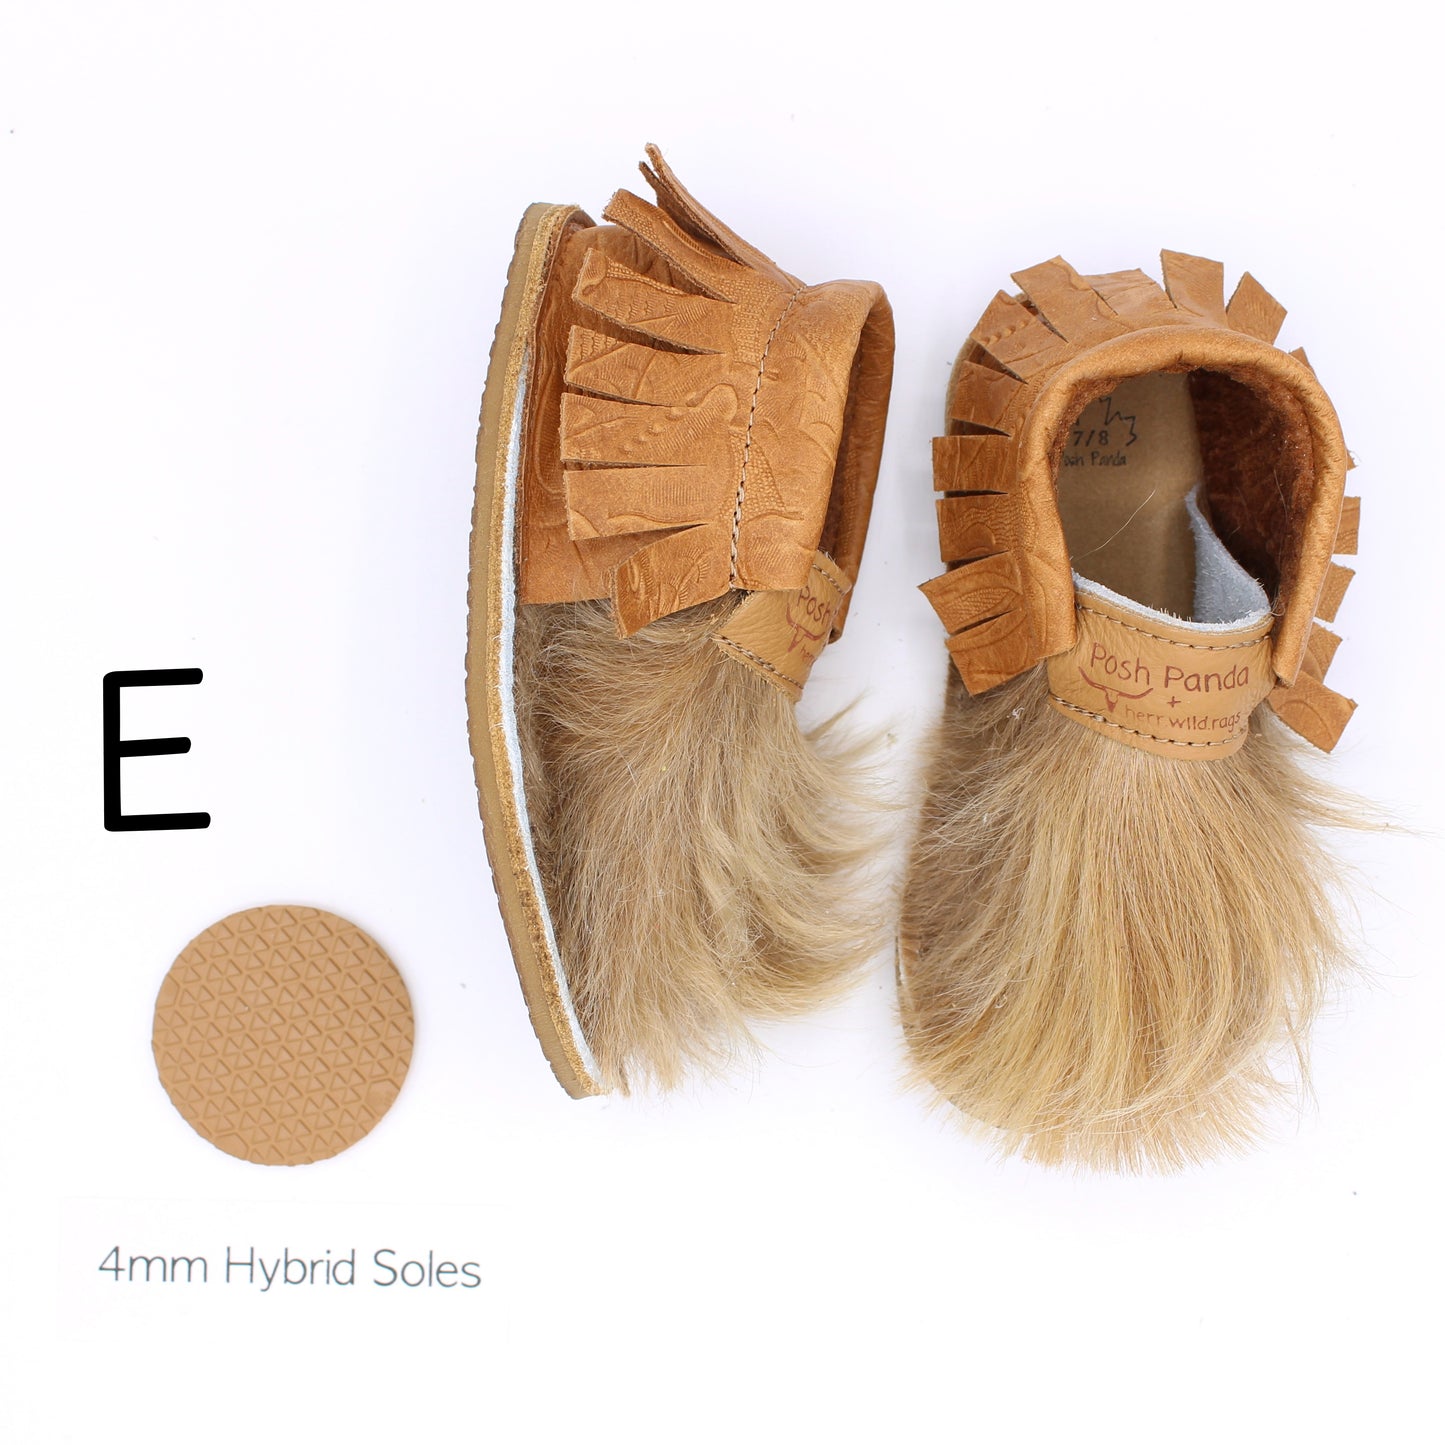 Hair Hide Mocs - TODDLER - Size 7/8 (4mm Sole)